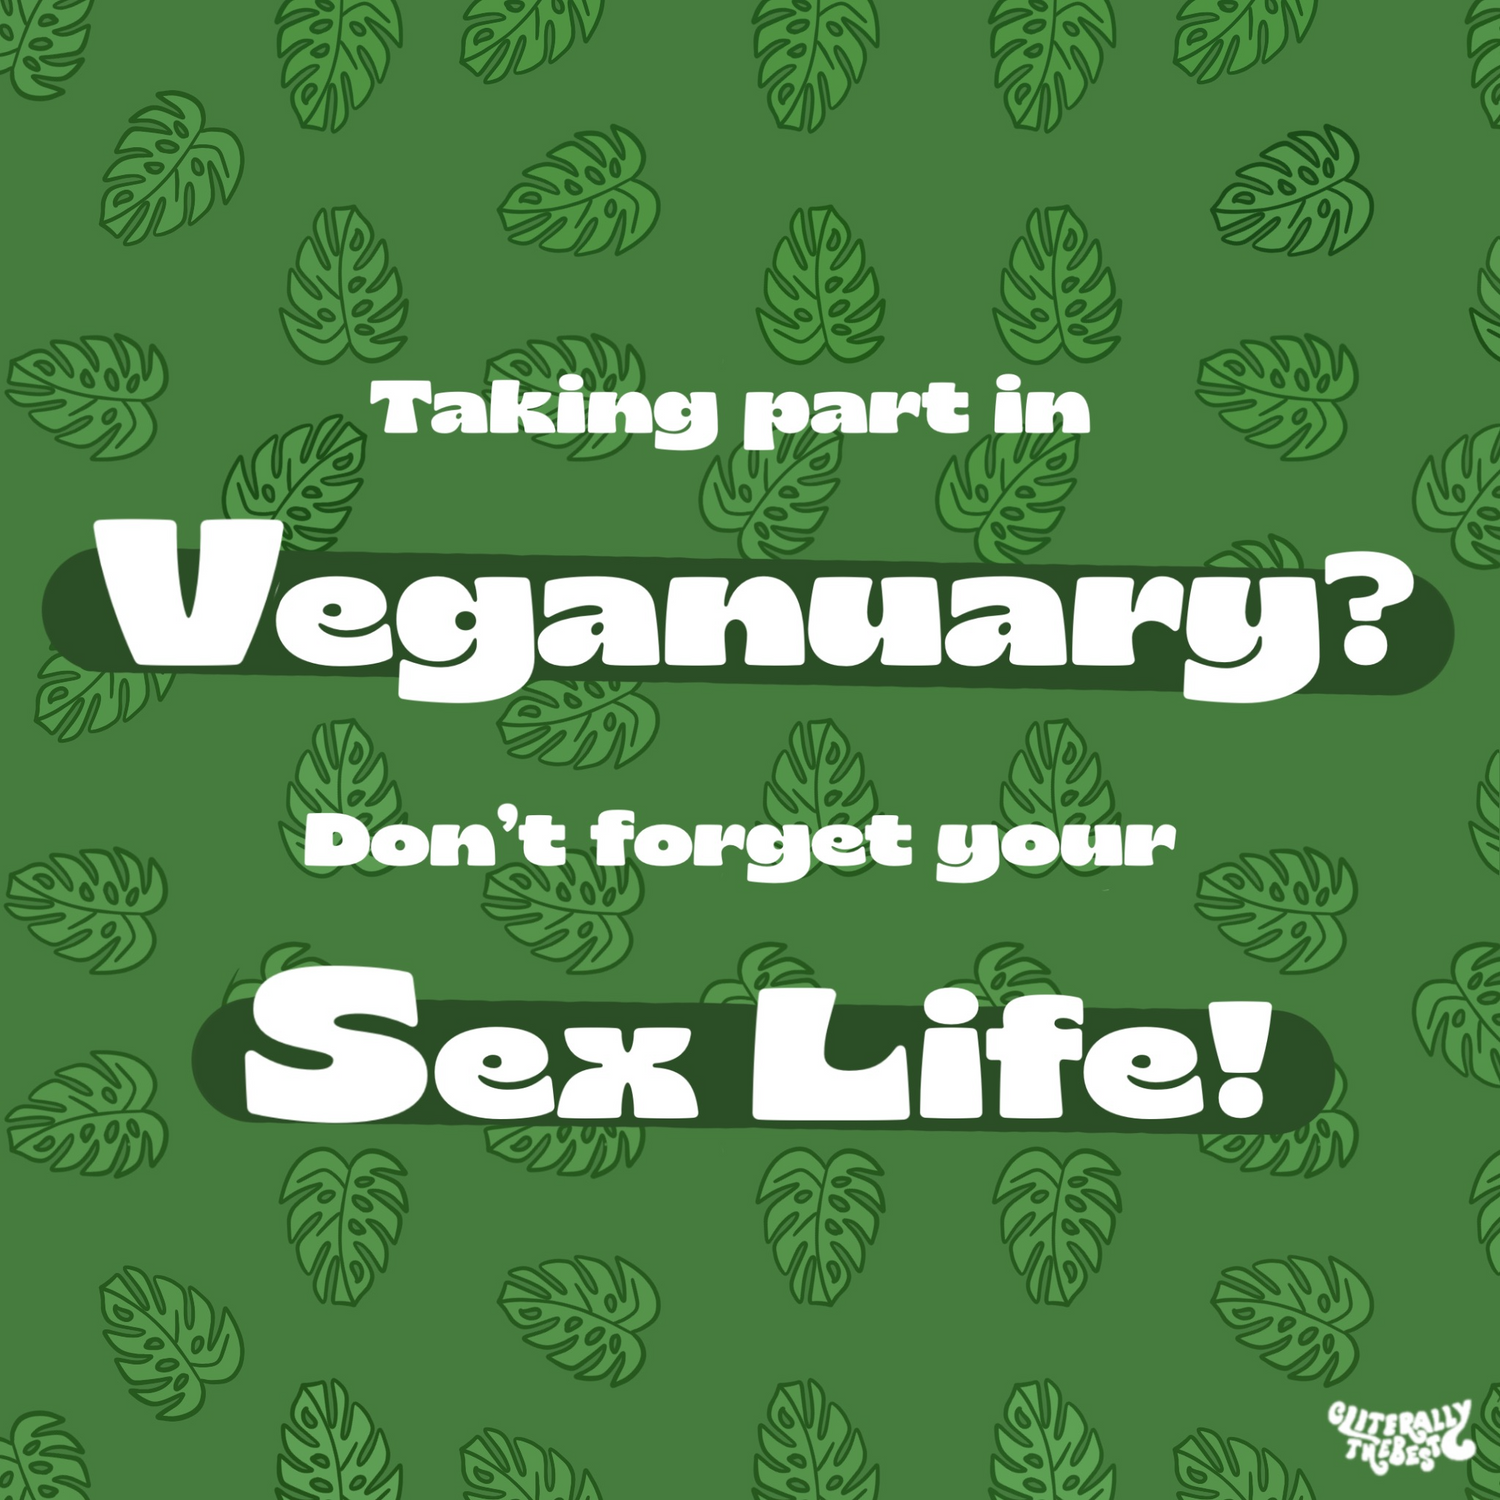 Taking Part In Veganuary - Don't Forget Your Sex Life!